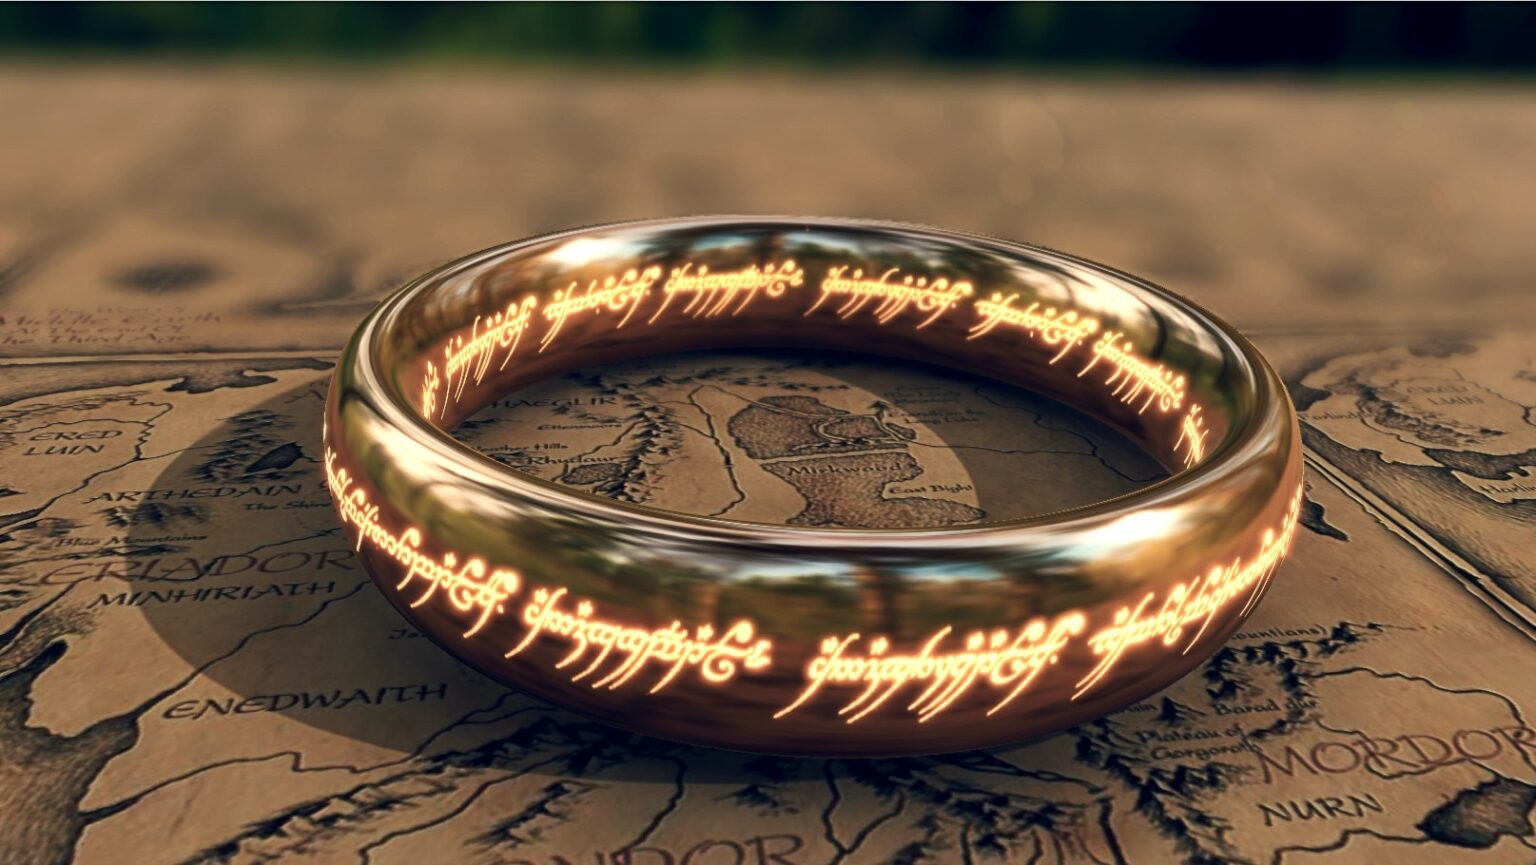 If you need a little bit of a refresh about the 'Lord of the Rings' TV series, here’s everything you need to know.